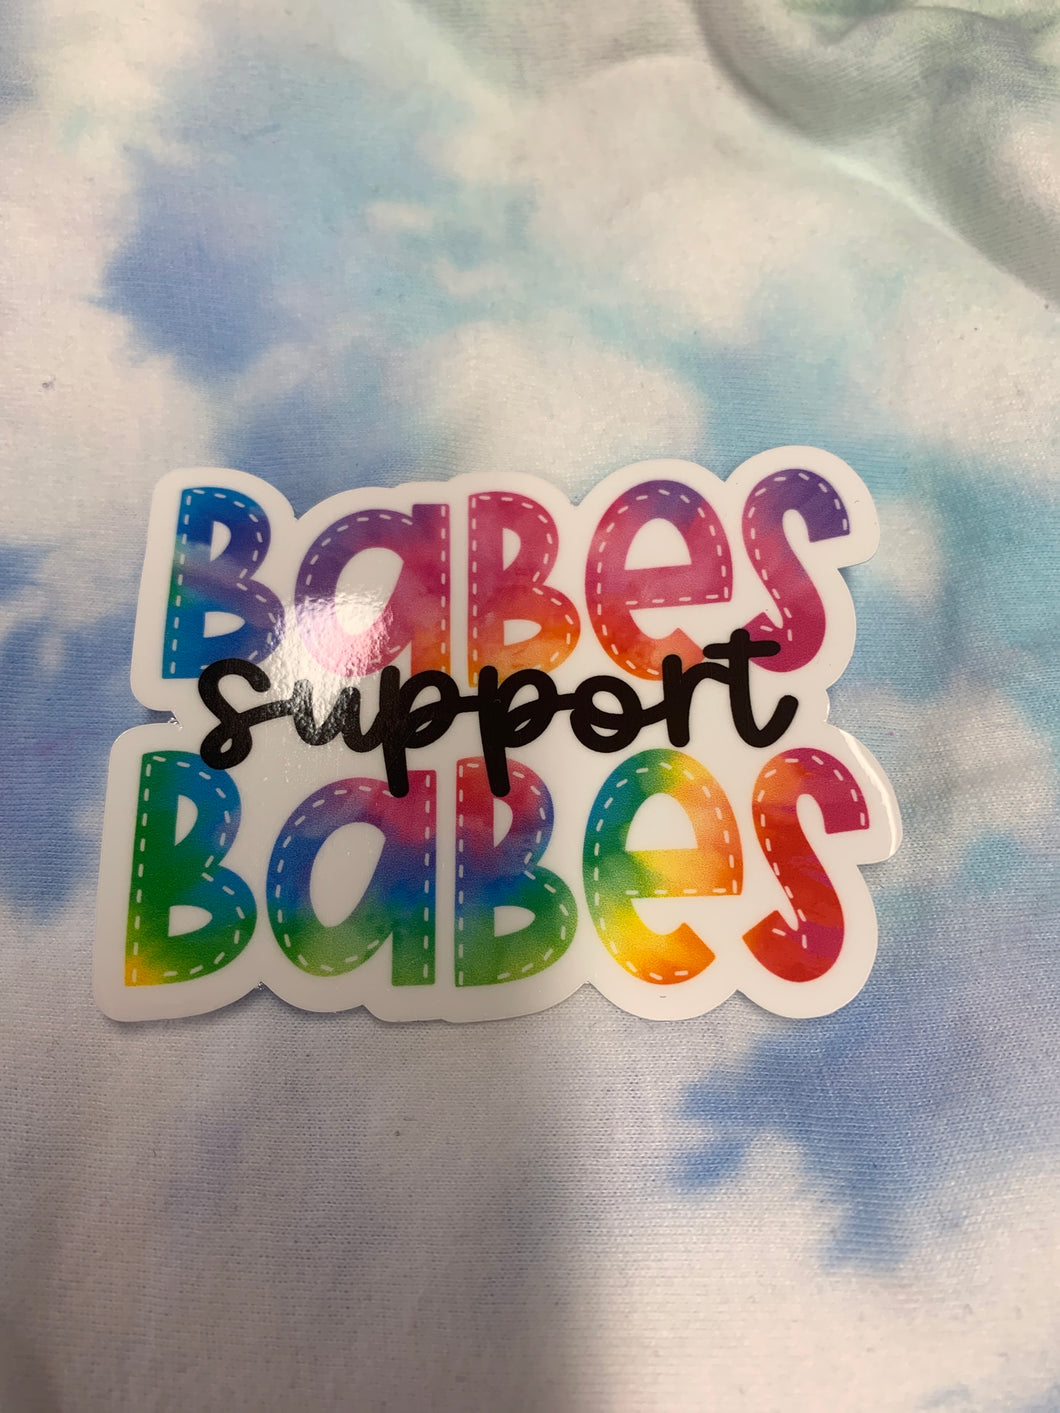 Babes support babes vinyl free shipping - Main glitter site 